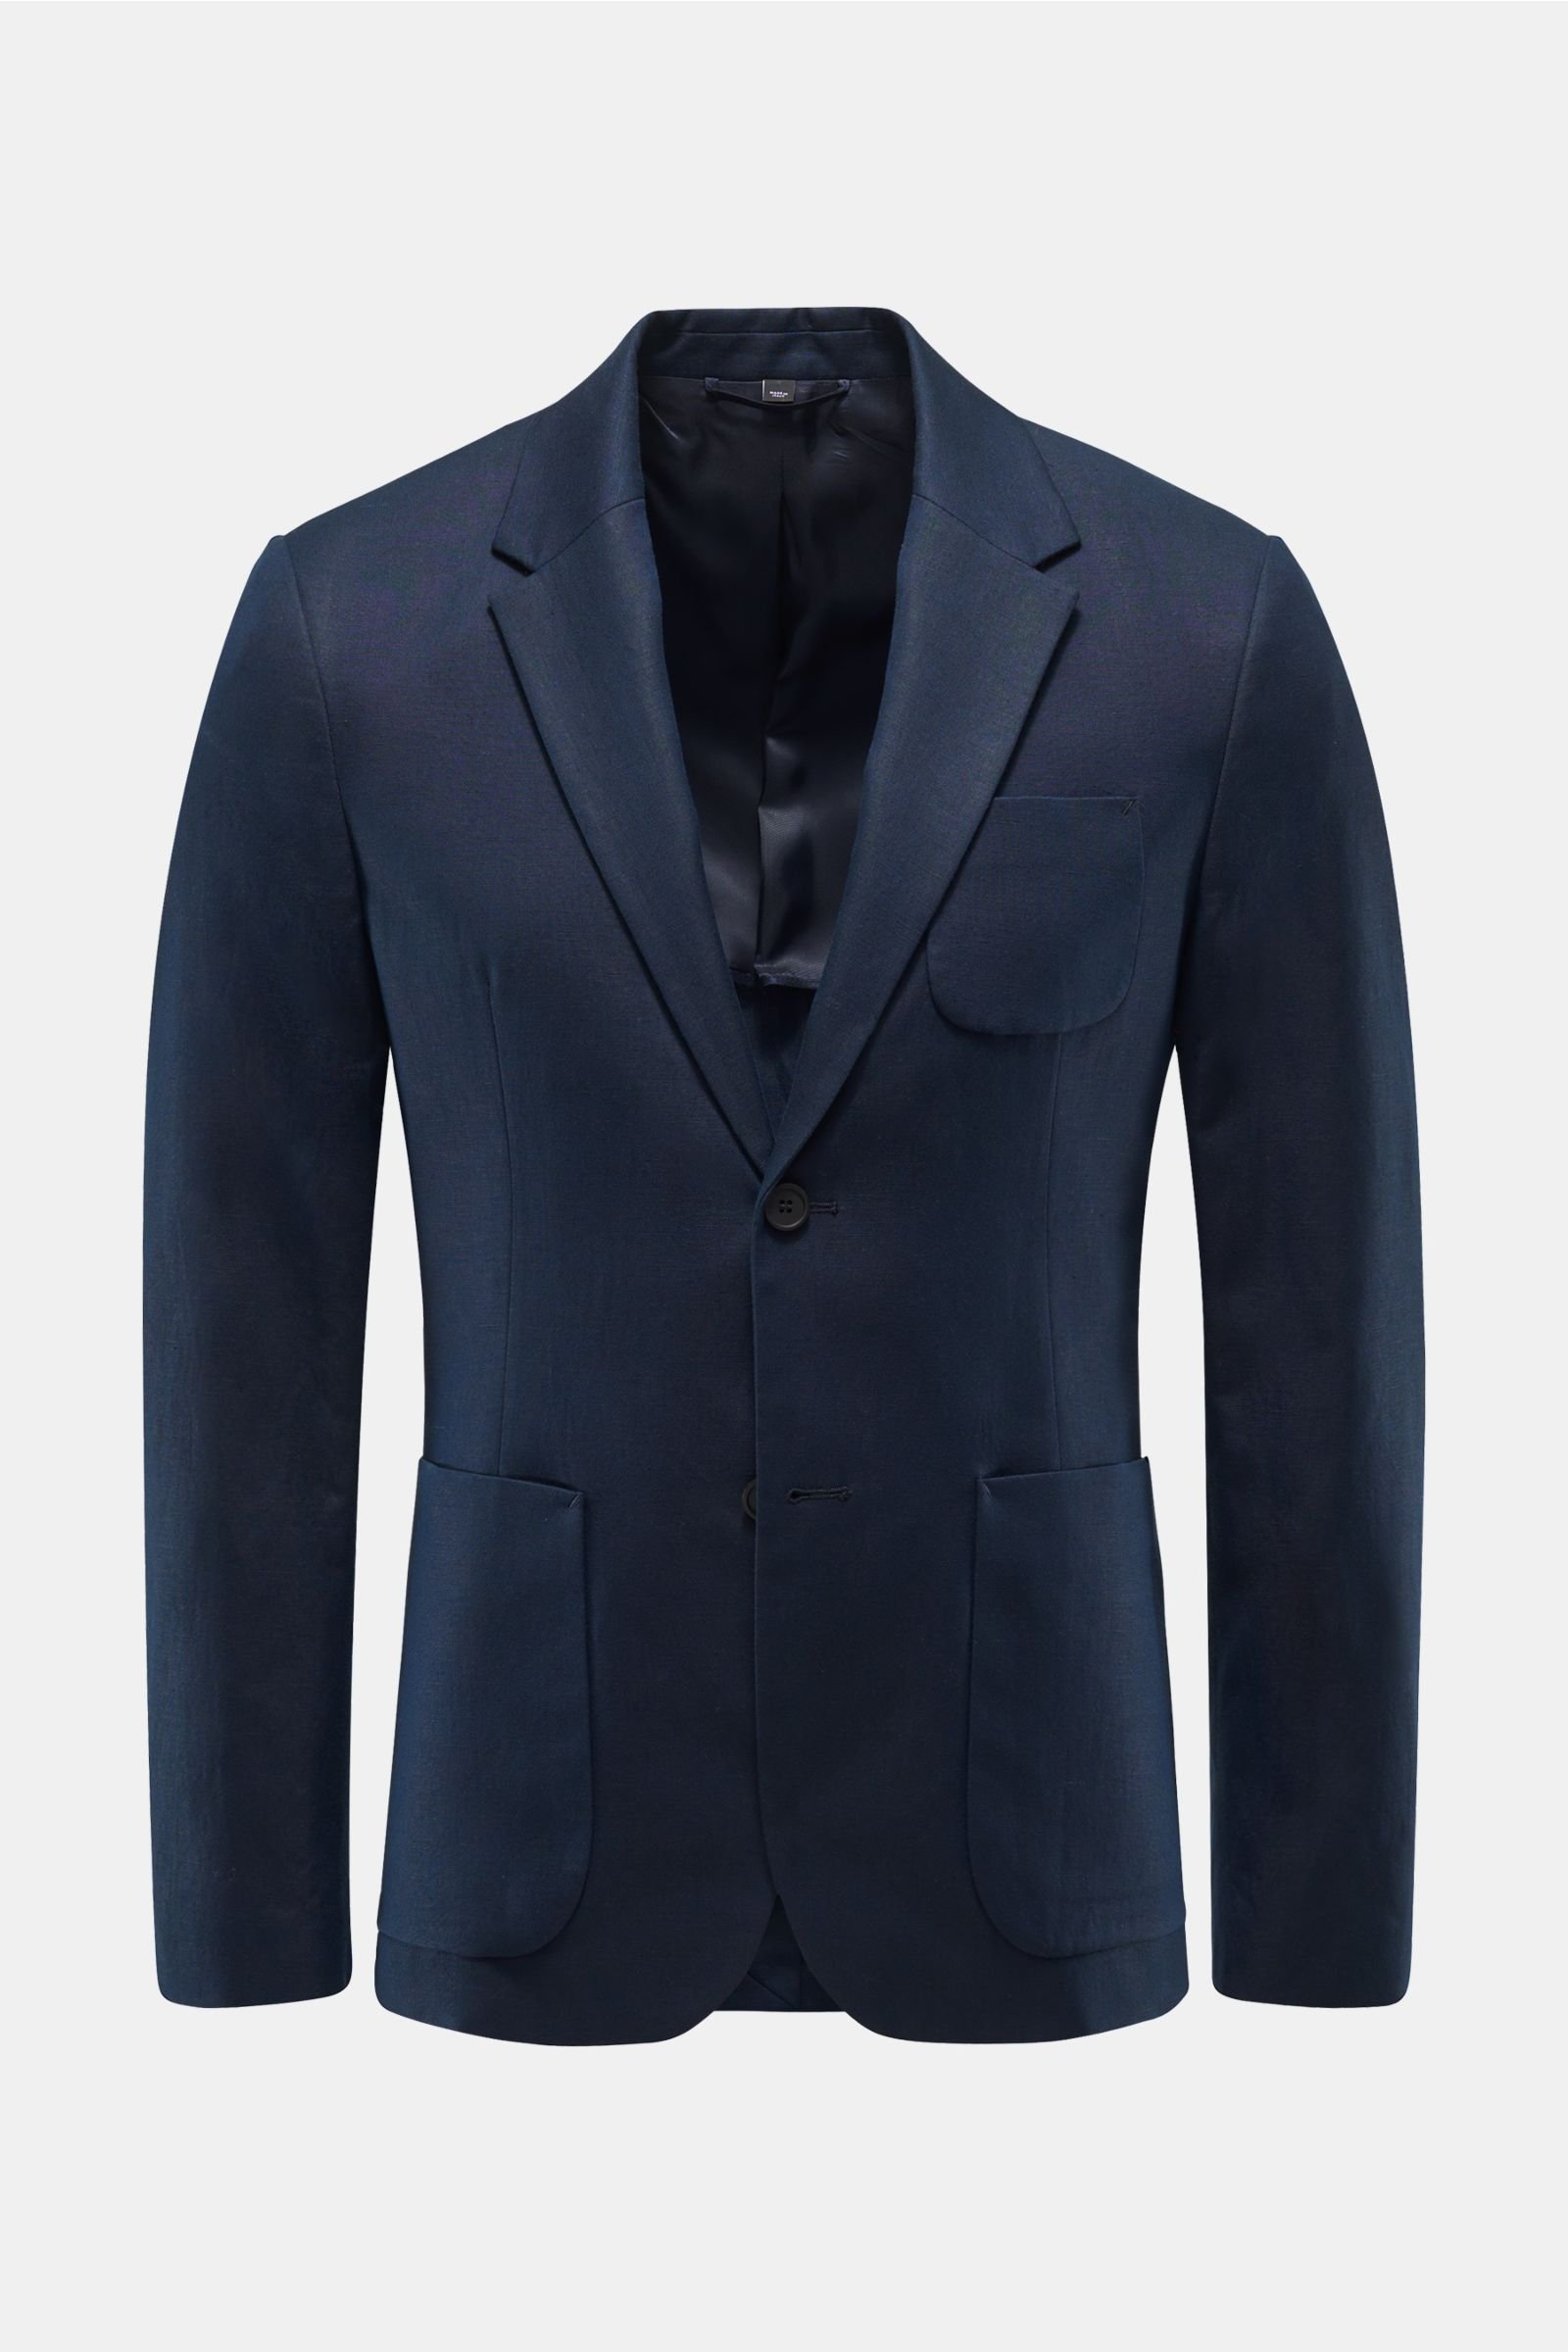 Smart-casual jacket 'Classic' navy